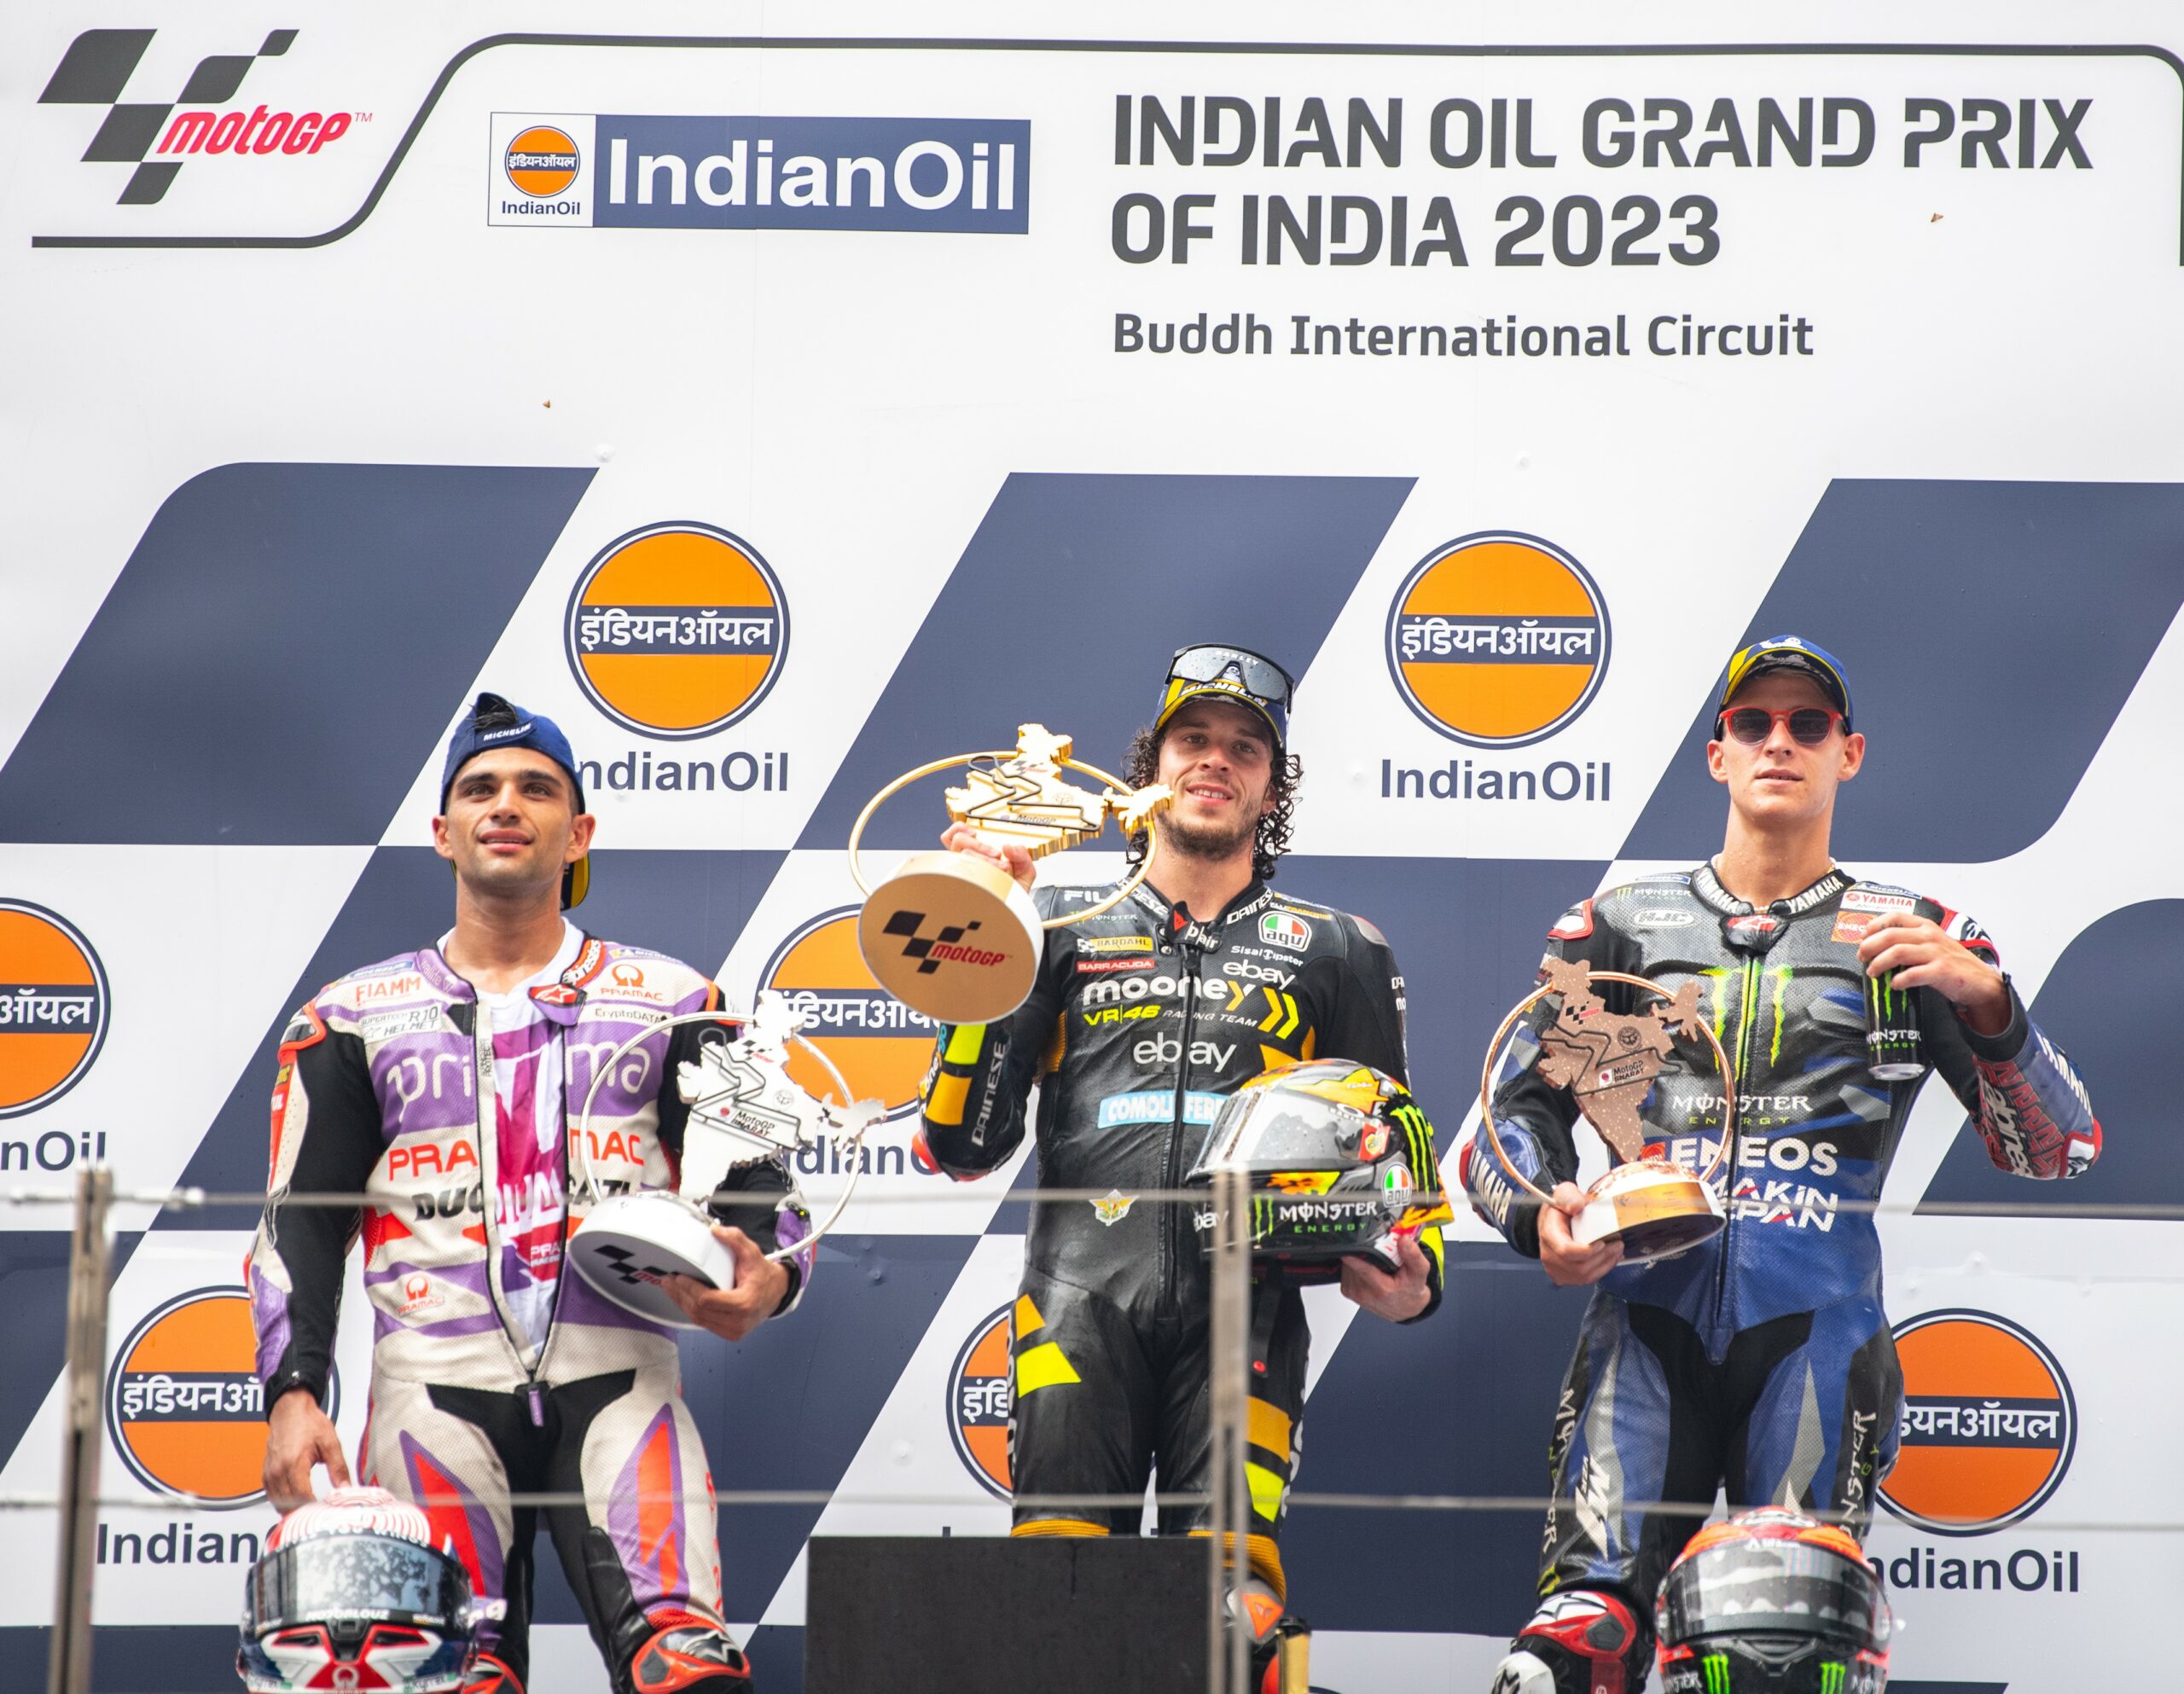 (L-R) Jorge Martin, Marco Bezzecchi, Fabio Quartararo- Bezzecchi lauded India and the crowd and expressed eagerness to come to India next year